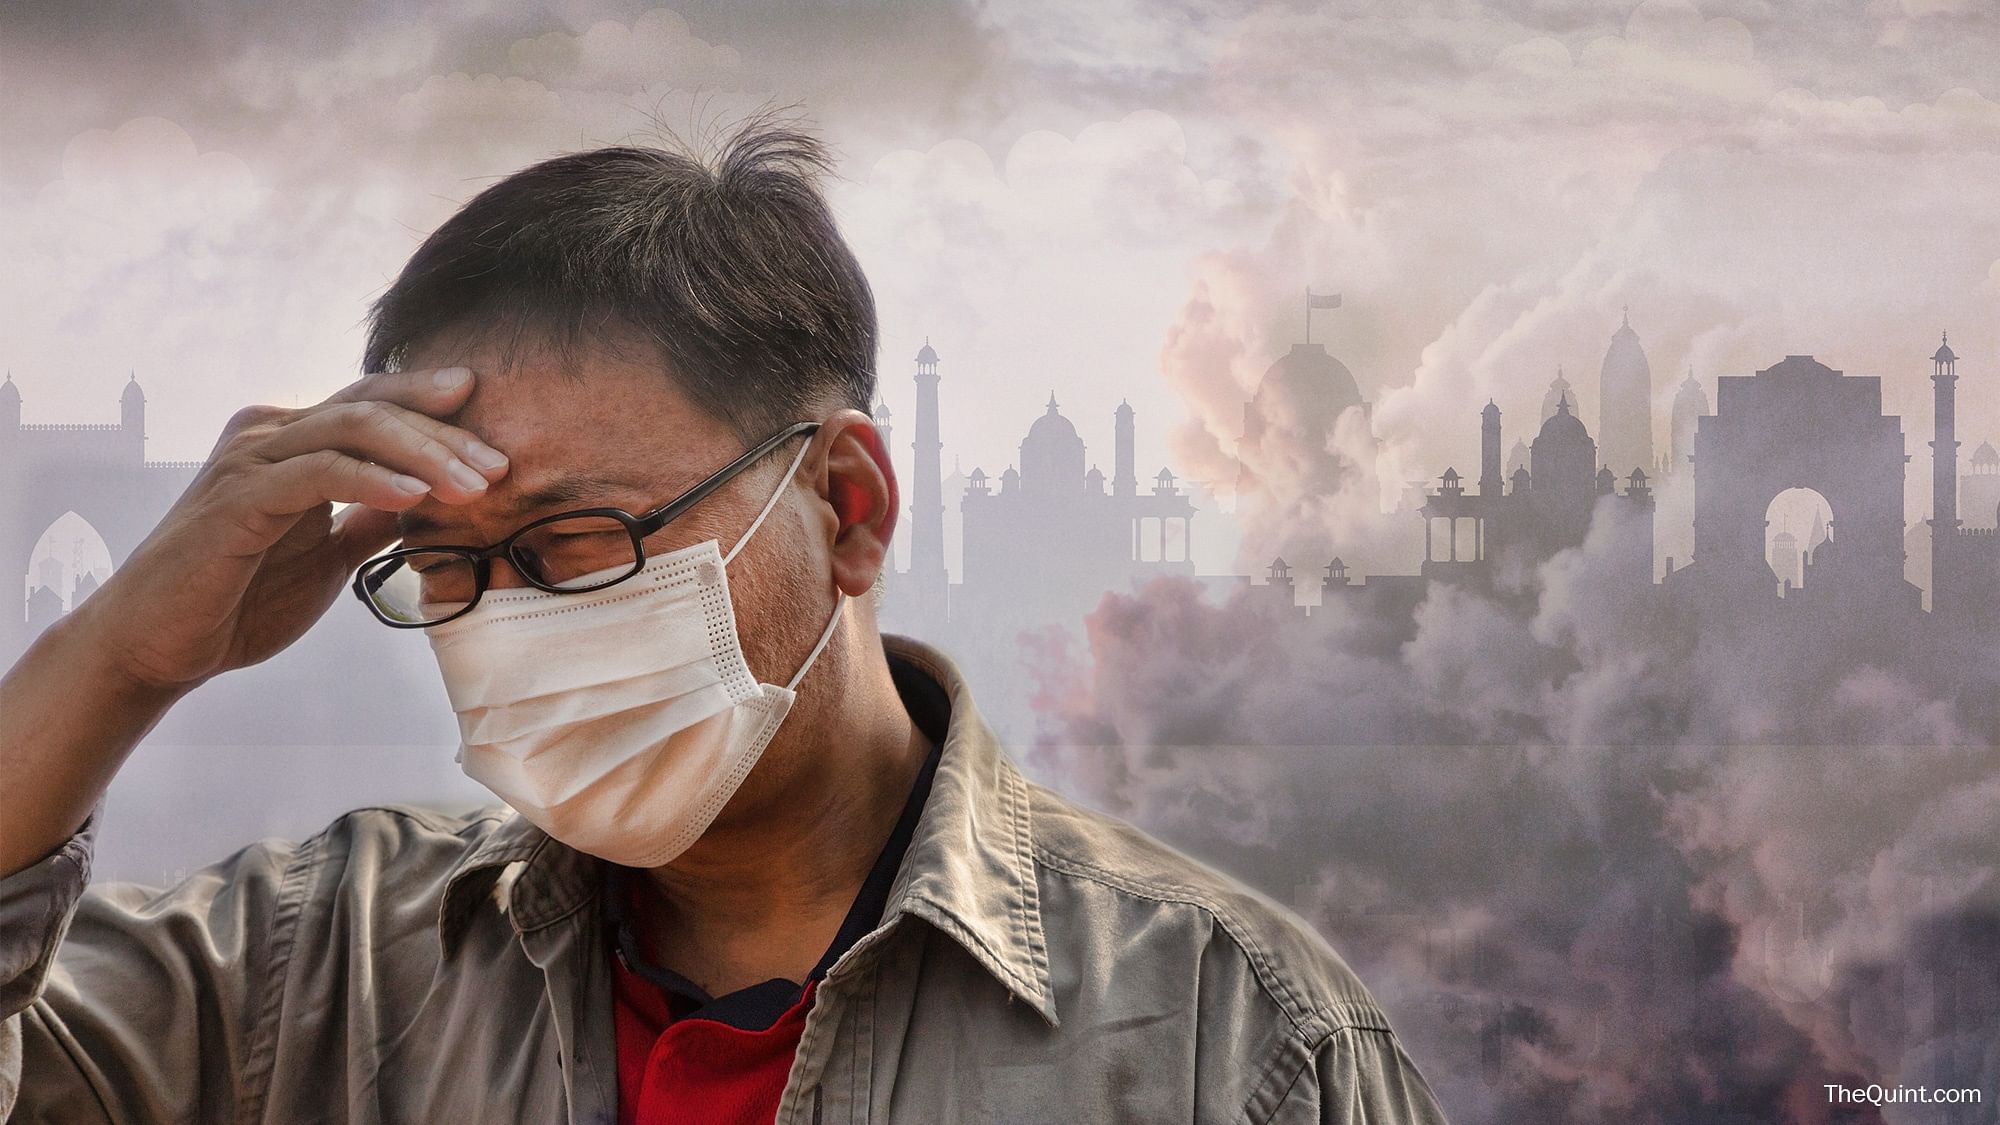 Delhi and its surrounding regions have been cloaked in a deathly smog over the past 10 days, posing a huge health and safety hazard. Image used for representational purposes.